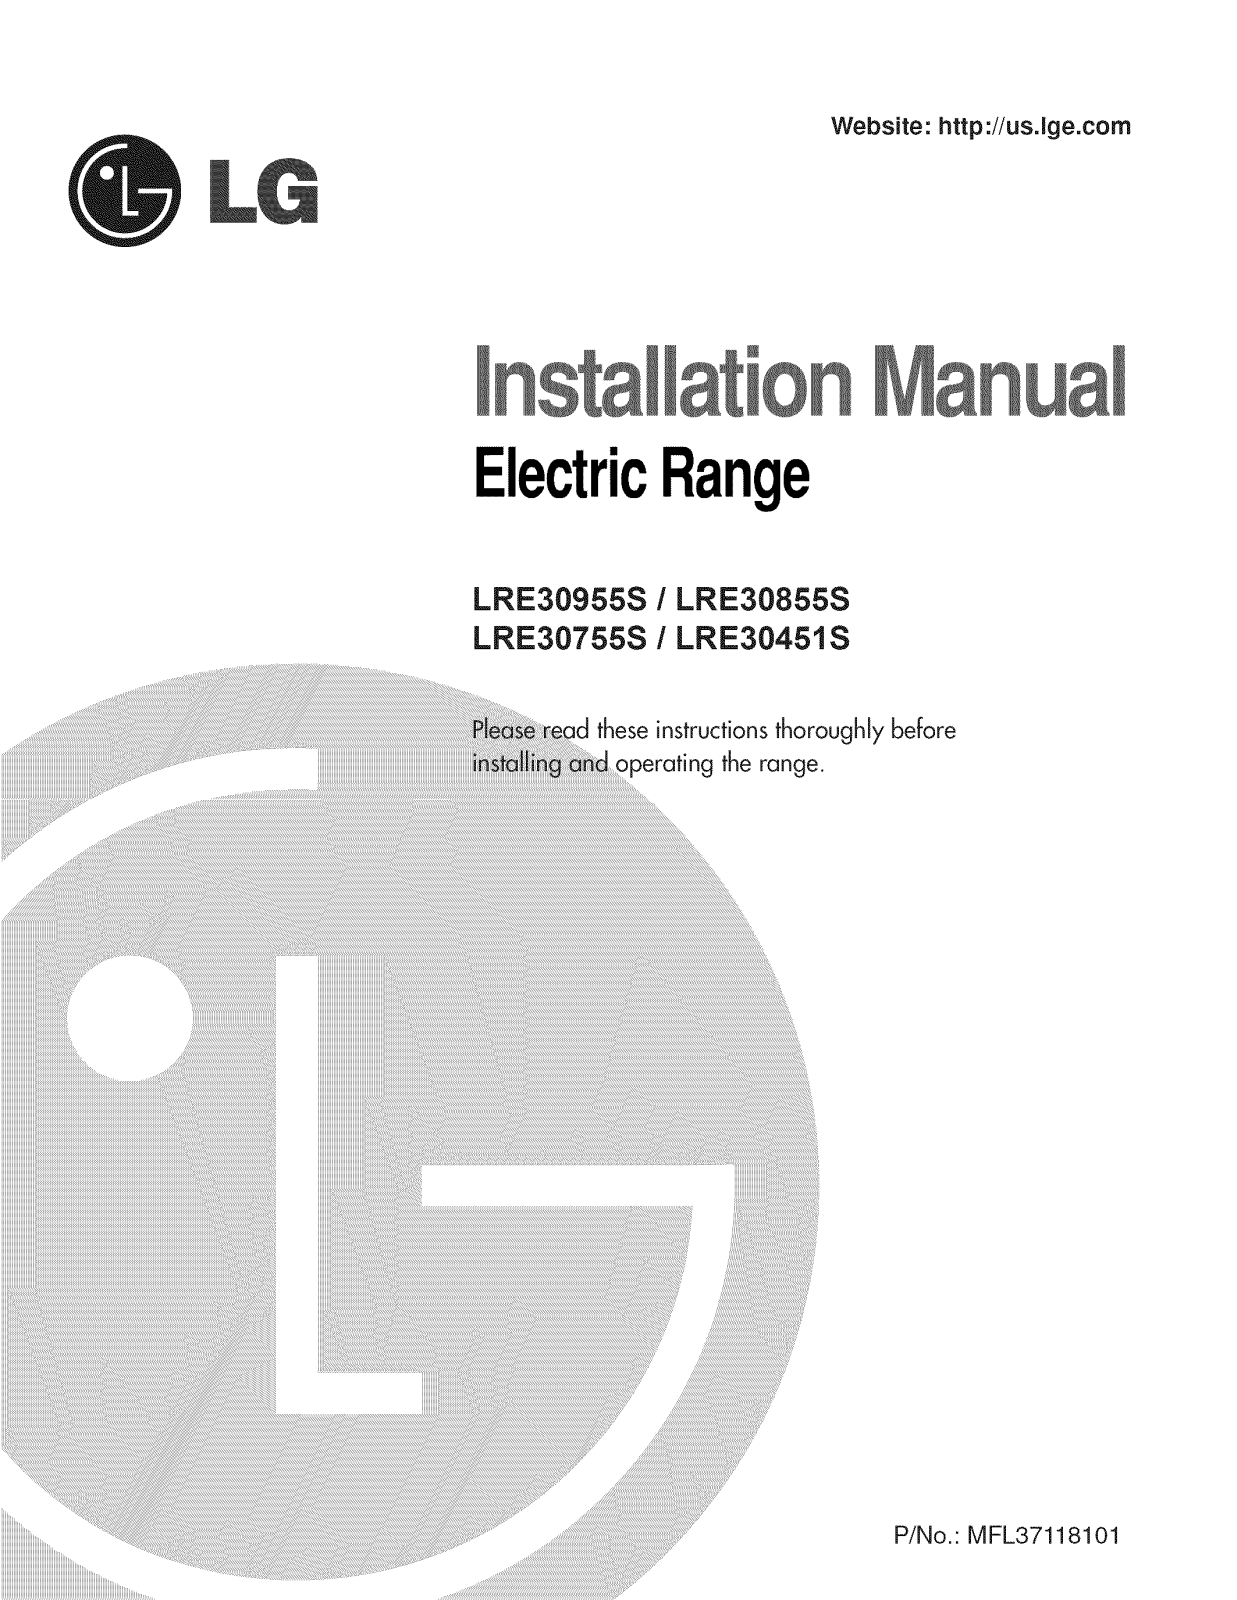 LG LRE30453ST/00, LRE30757SW/00, LRE30955ST/00, LRE30757SB/00, LRE30757ST/00 Installation Guide